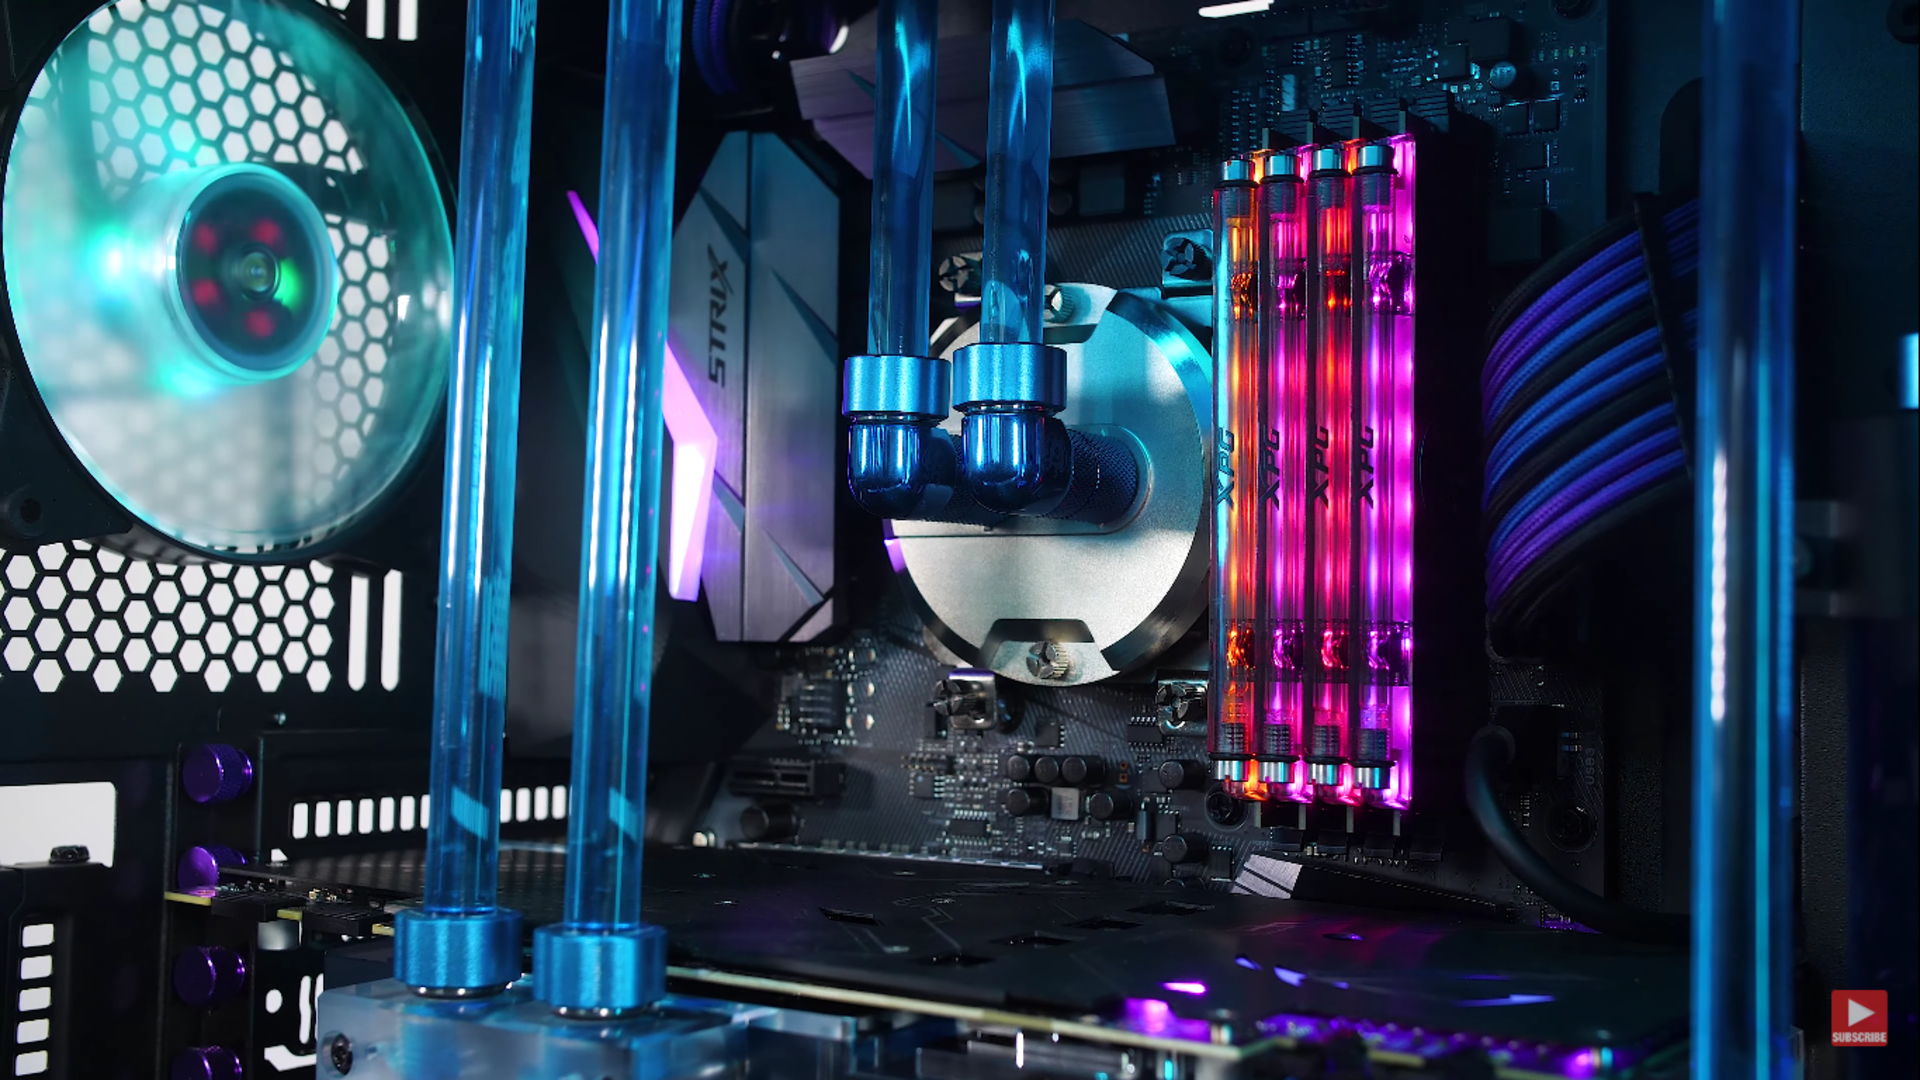 General 1920x1080 PC build water cooling 120MM fan computer hardware technology